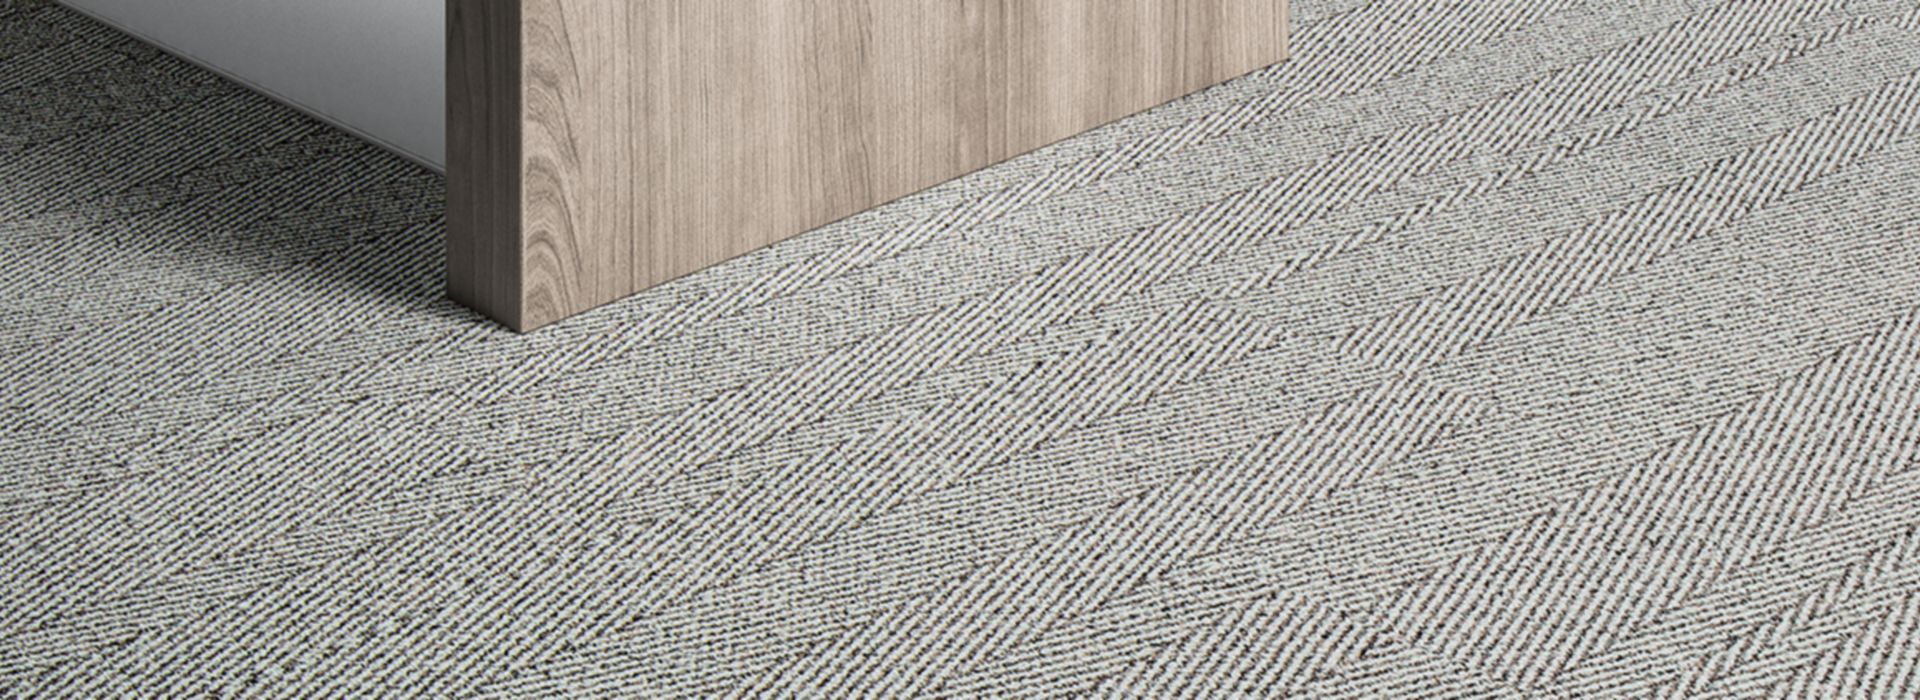 Interface Stitch in Timeplank carpet tile  in office with wood desk and chair image number 1